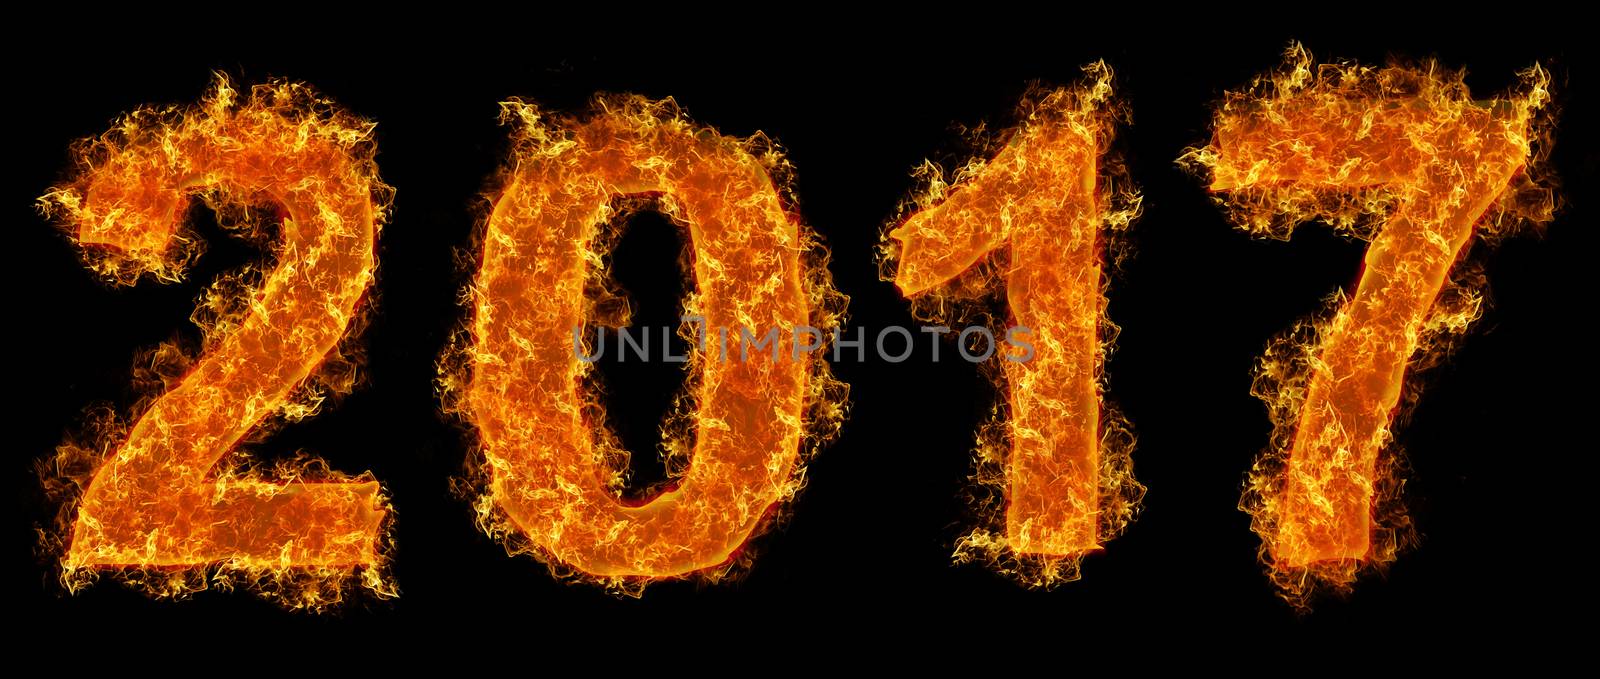 fire year of 2017 by rusak